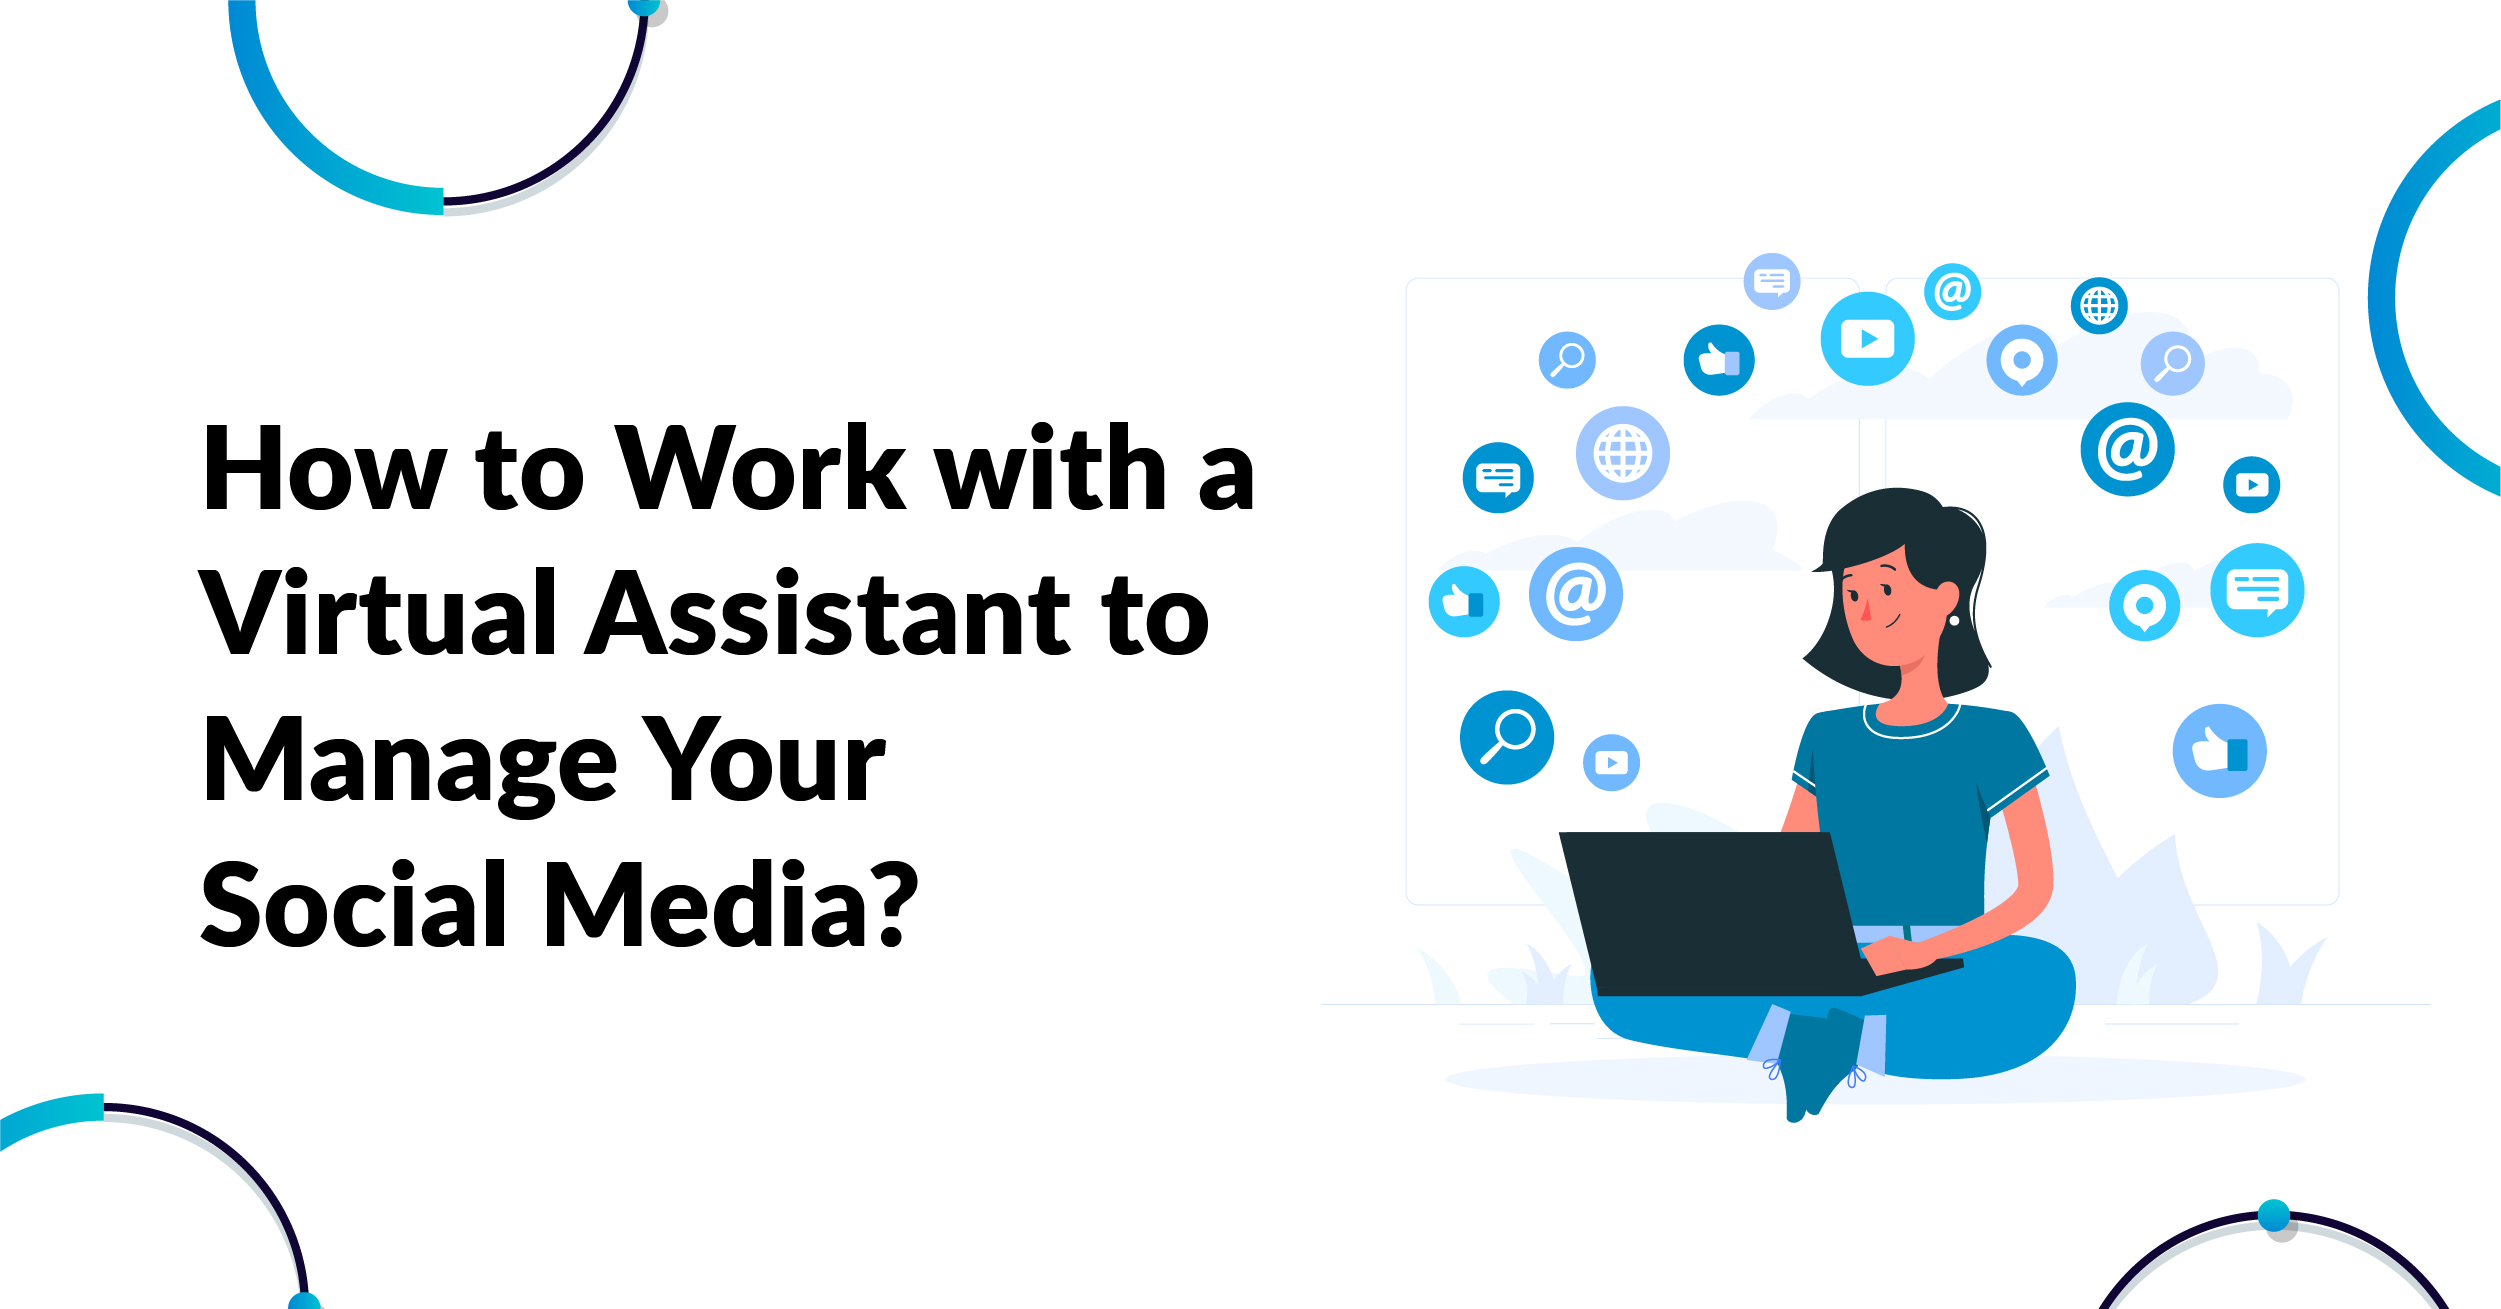 How To Work With A Virtual Assistant To Manage Your Social Media